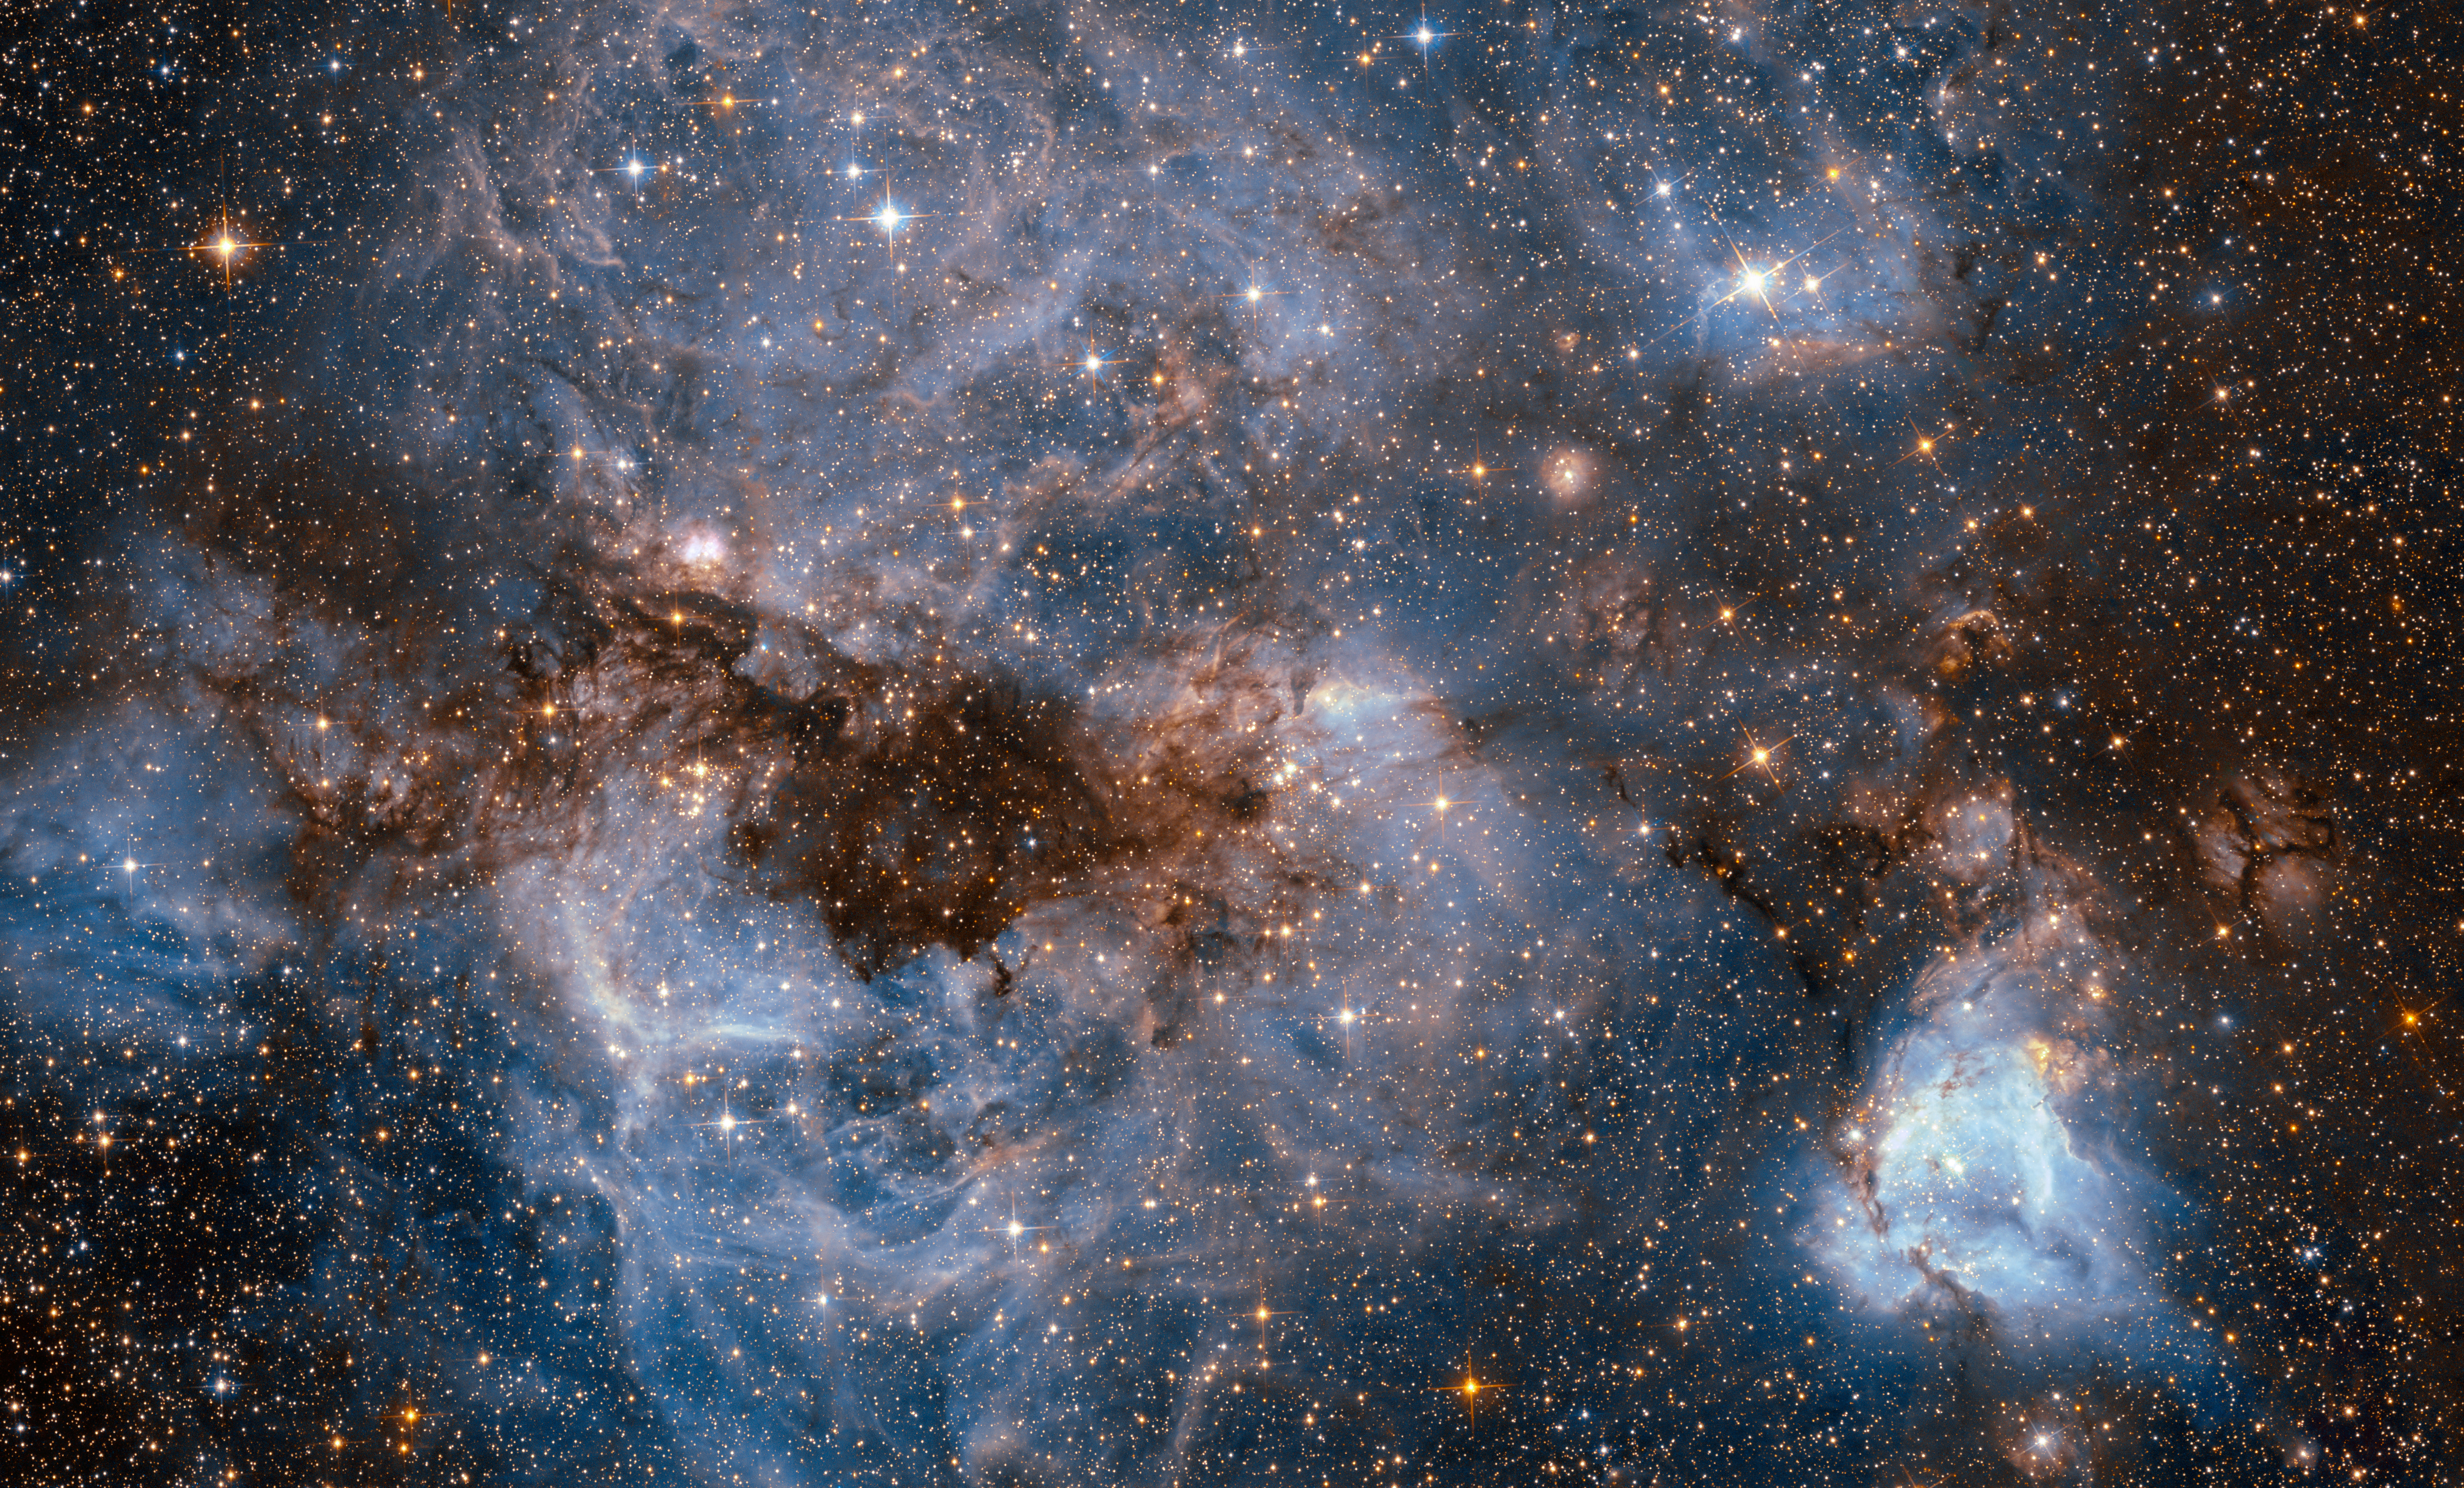 This shot from the NASA/ESA Hubble Space Telescope shows a maelstrom of glowing gas and dark dust within one of the Milky Way’s satellite galaxies, the Large Magellanic Cloud (LMC). This stormy scene shows a stellar nursery known as N159, an HII region over 150 light-years across. N159 contains many hot young stars. These stars are emitting intense ultraviolet light, which causes nearby hydrogen gas to glow, and torrential stellar winds, which are carving out ridges, arcs, and filaments from the surrounding material. At the heart of this cosmic cloud lies the Papillon Nebula, a butterfly-shaped region of nebulosity. This small, dense object is classified as a High-Excitation Blob, and is thought to be tightly linked to the early stages of massive star formation. N159 is located over 160 000 light-years away. It resides just south of the Tarantula Nebula (heic1402), another massive star-forming complex within the LMC. It was previously imaged by Hubble’s Wide Field Planetary Camera 2, which also resolved the Papillon Nebula for the first time.